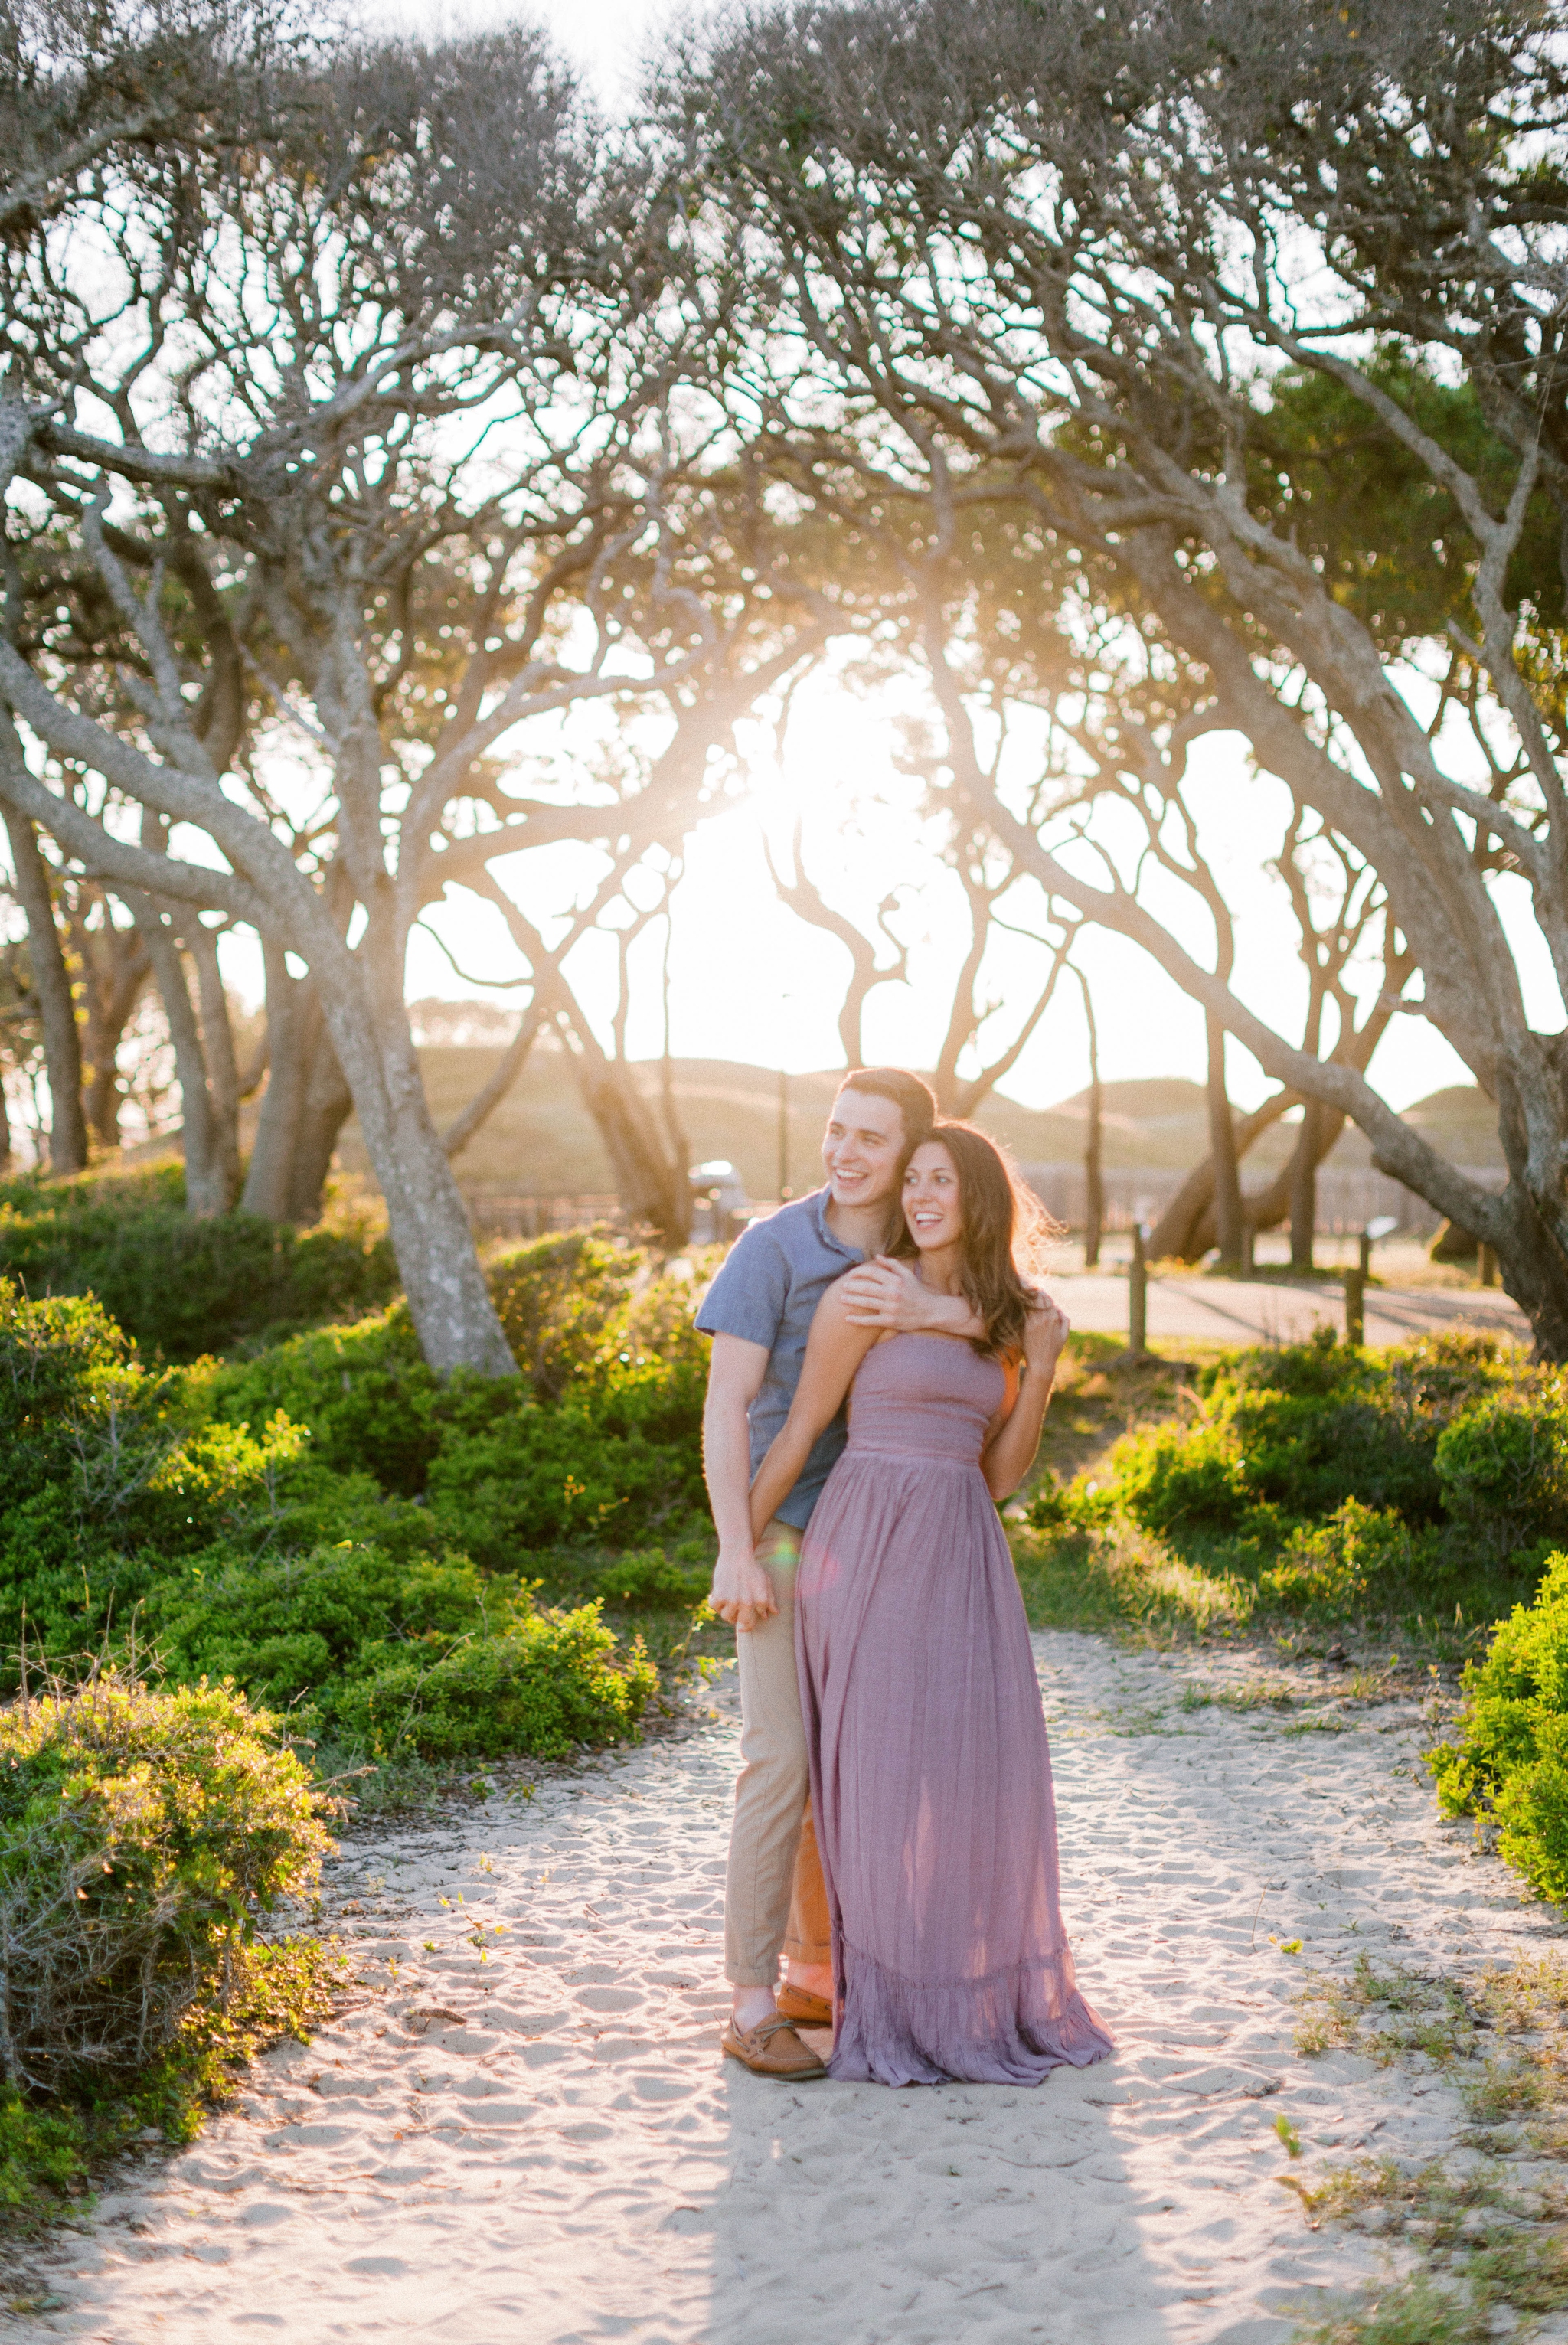  Guy dancing with girl in front of live oak trees with the sunset behind them - Woman is in a flowy pastel maxi dress - unposed and candid outdoor golden light session - engagement photographer in honolulu, oahu, hawaii - johanna dye 